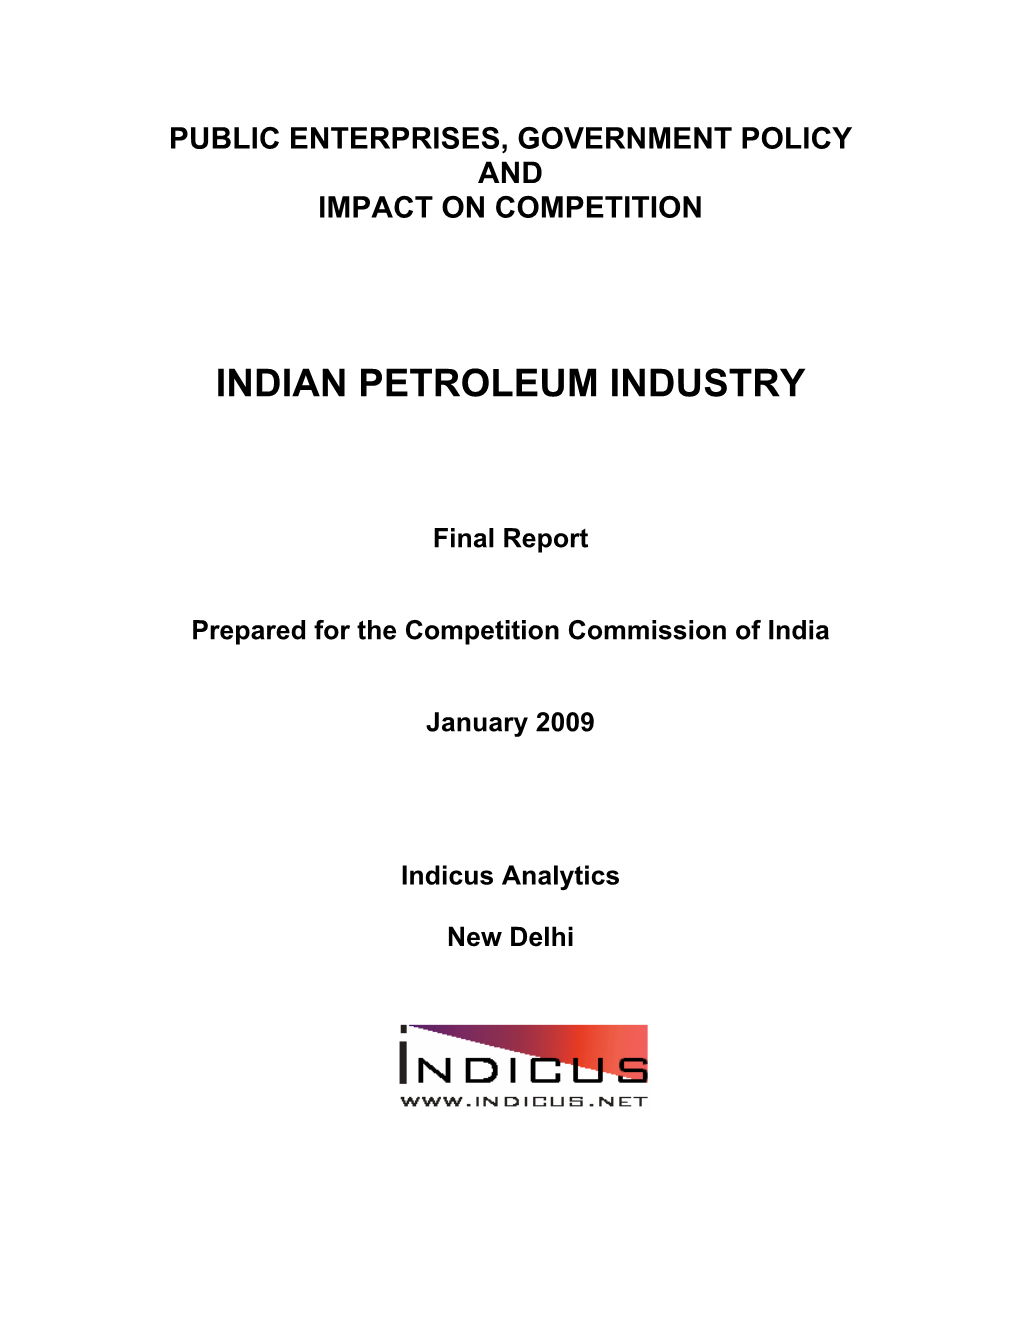 State of Competition in the Indian Petroleum Refining Industry